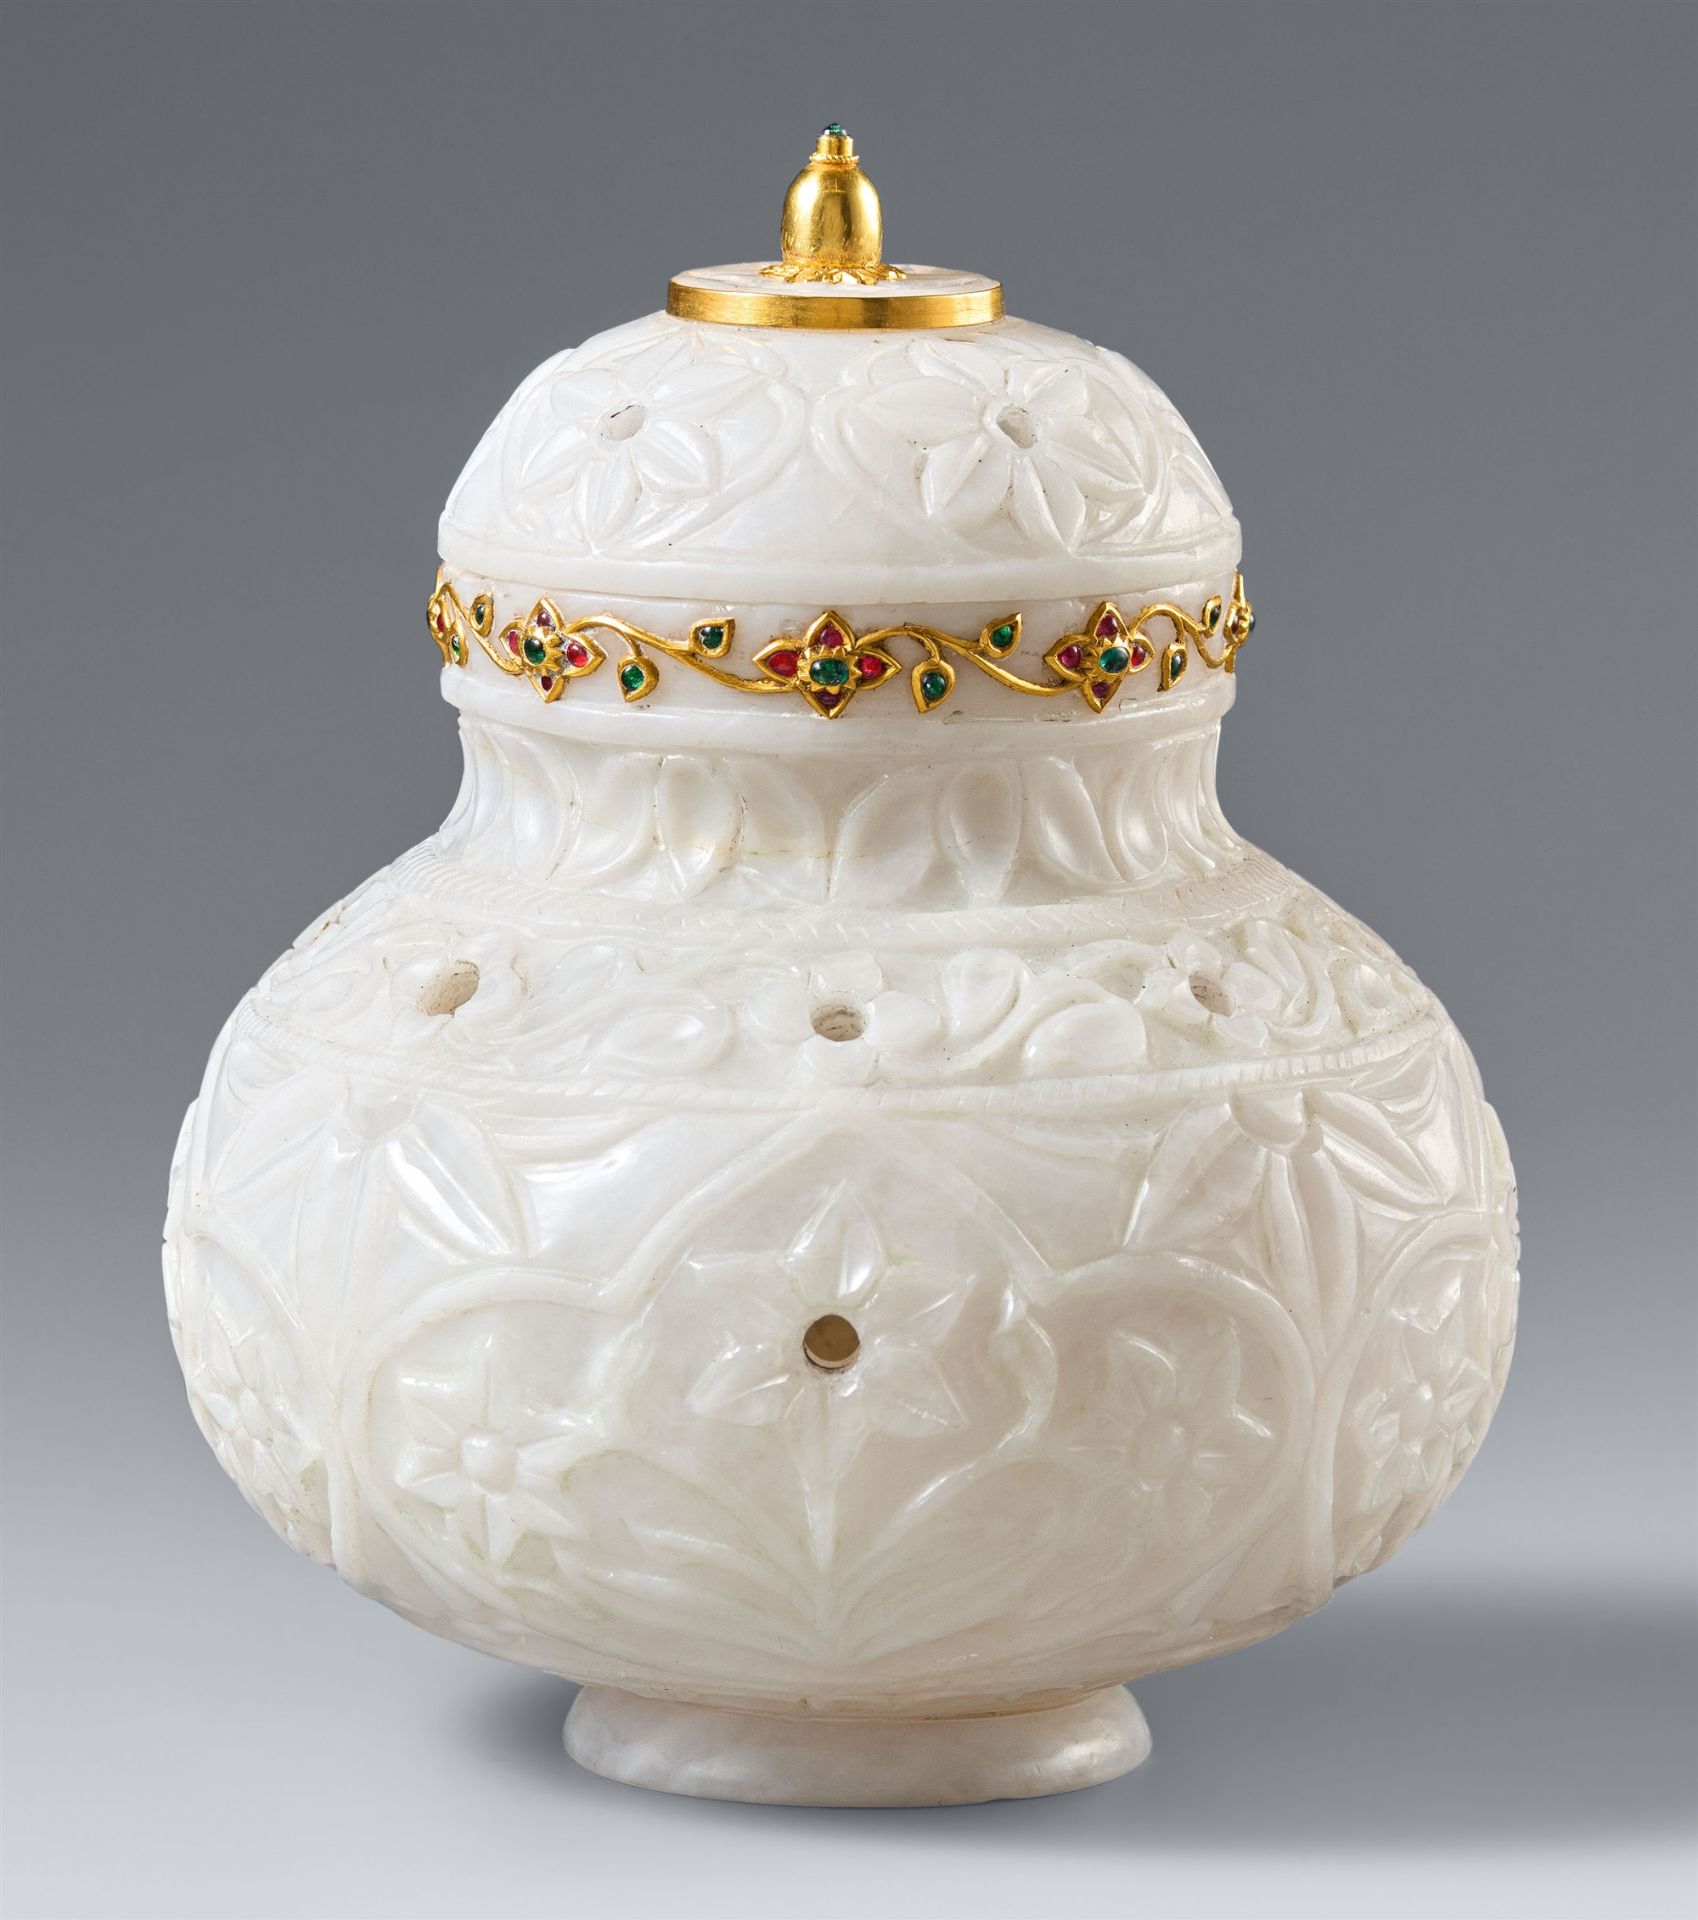 A Mughal-style white marble lidded jar. India.